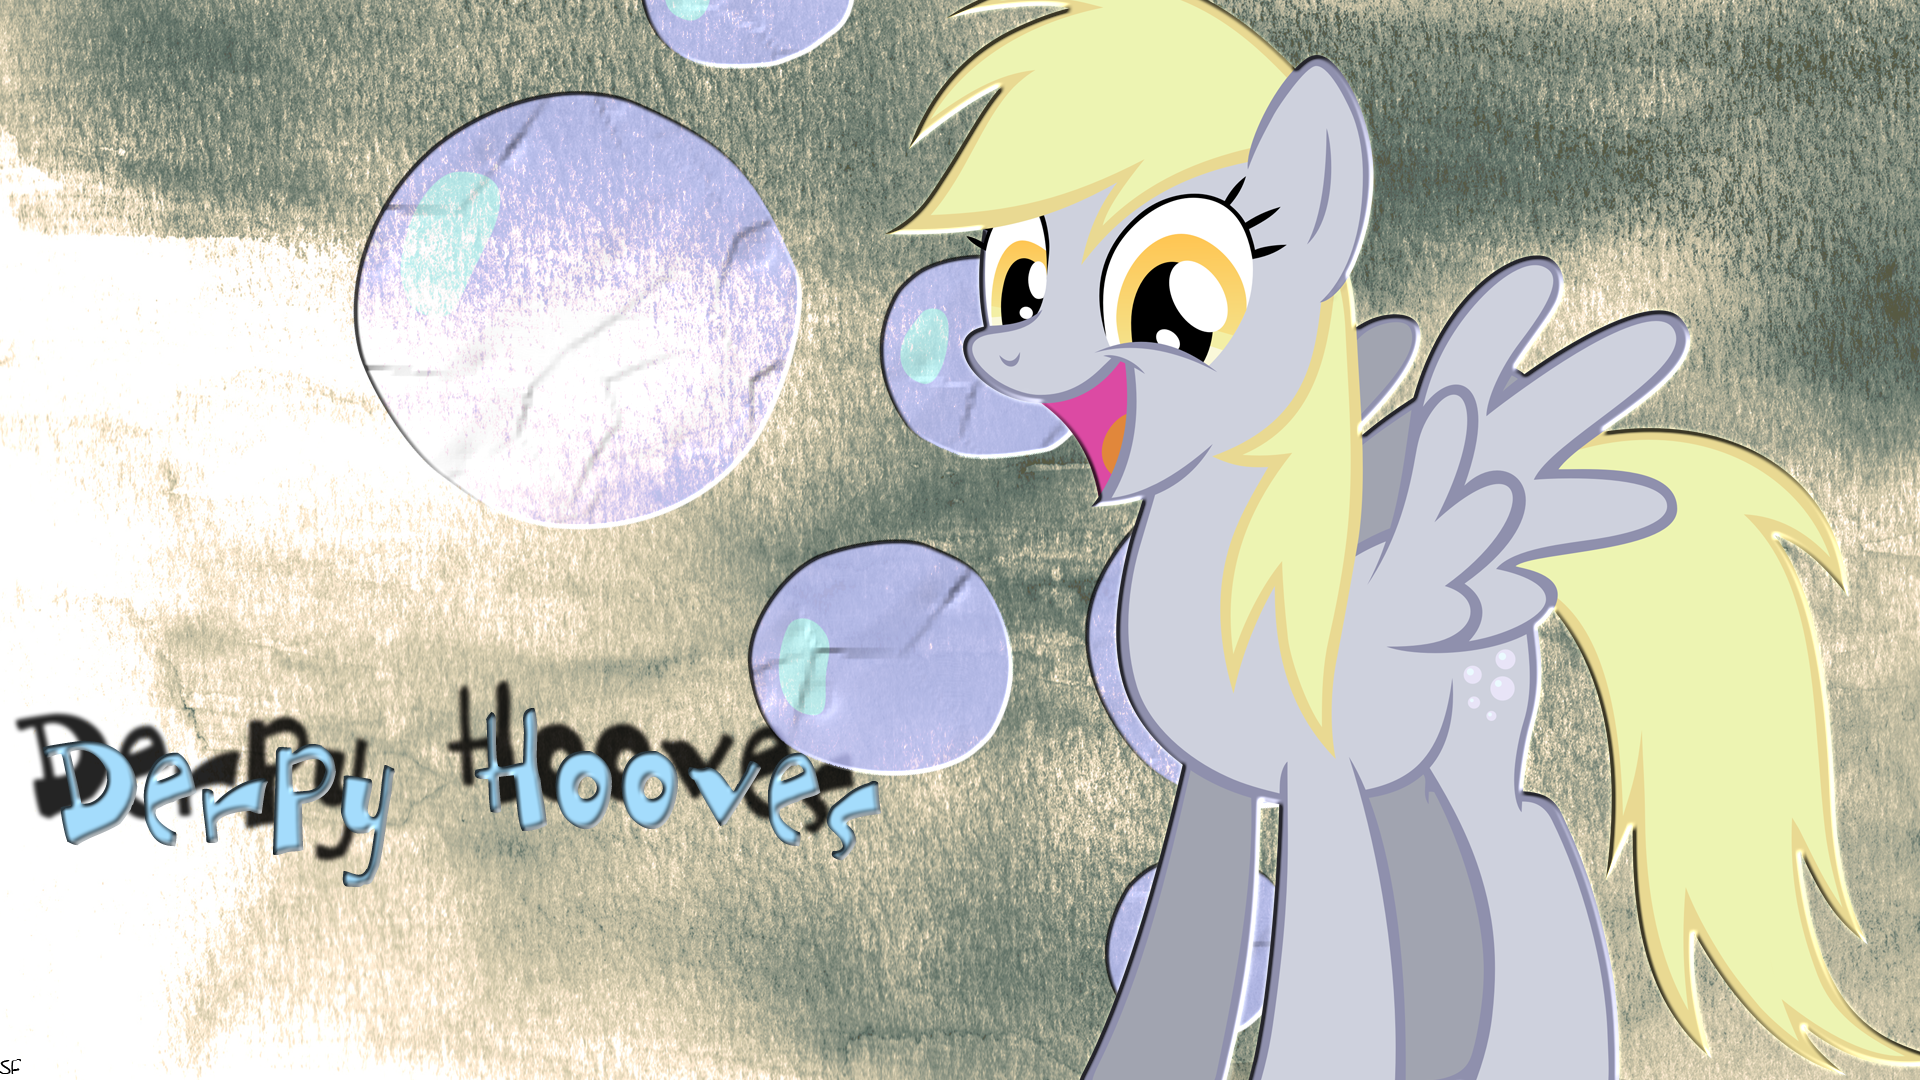 DERPY /)(^3^)(\ by BlackGryph0n, noxwyll and SolarFlare-Solis